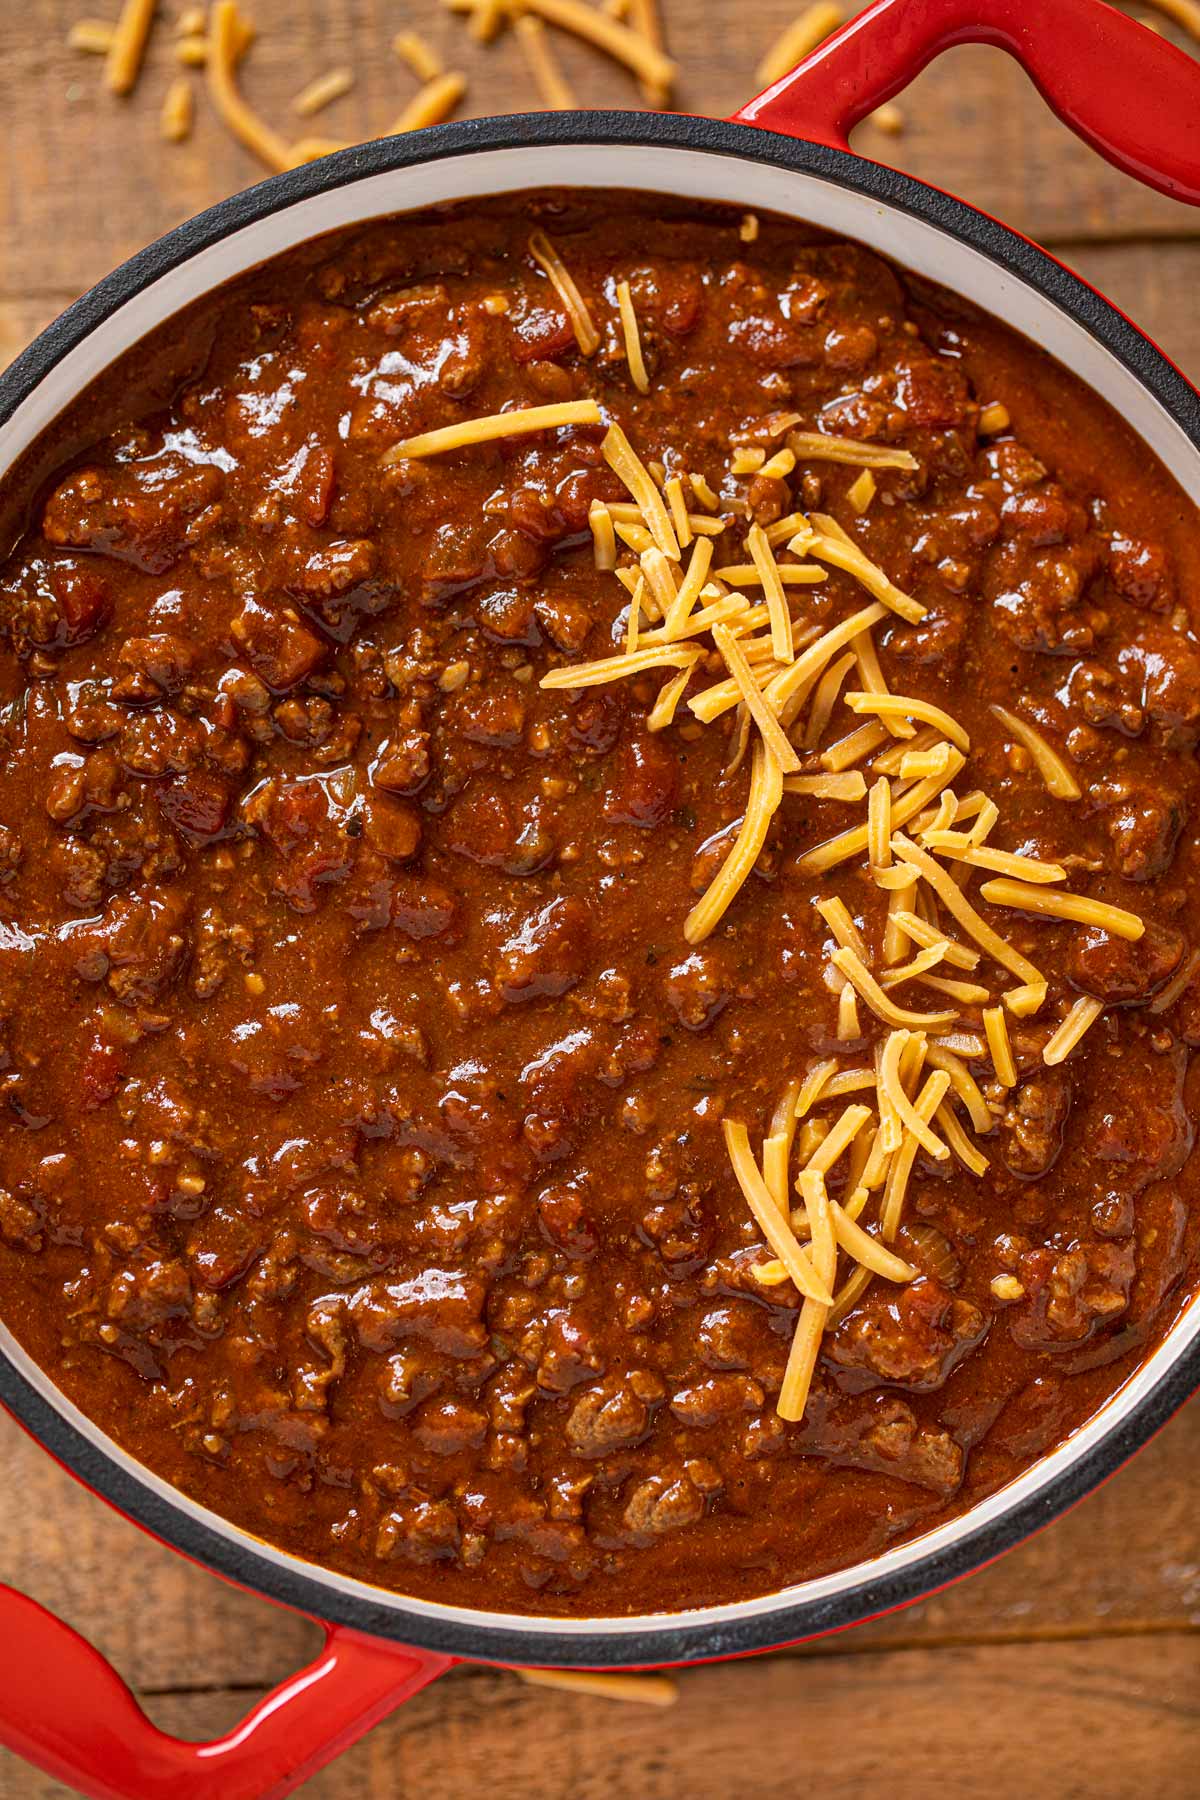 texas chili should my outside ac unit blow hot air water softener tax credit hvac services kansas air conditioner blowing hot air inside and cold air outside standard plumbing near me sink gurgles when ac is turned on government regulations on air conditioners manhattan ks water m and b heating and air manhattan kansas water bill furnace flame sensors can an ac unit leak carbon monoxide why does my ac keep blowing hot air furnace issues in extreme cold seer rating ac vip exchanger can you bypass a flame sensor my furnace won't stay on ac unit in basement leaking water faucet repair kansas city clean furnace ignitor r22 refrigerant laws can you buy r22 without a license manhattan remodeling new refrigerant regulations ac unit not blowing hot air central air unit blowing warm air bathroom remodeling services kansas city ks pilot light is on but furnace won't start bathroom restore why furnace won't stay lit k s services sewer line repair kansas city air conditioner warm air how to check the pilot light on a furnace manhattan ks pollen count cleaning igniter on gas furnace central air unit won't turn on why my furnace won't stay lit why won't my furnace stay on ac is just blowing air why is ac not turning on can t find pilot light on furnace how much for a new ac unit installed plumbing and heating logo r 22 refrigerant for sale air conditioner leaking water in basement ac unit leaking water in basement air manhattan where to buy flame sensor for furnace outdoor ac unit not blowing hot air drain tiles for yard furnace won't stay ignited ac plunger not working what if your ac is blowing hot air how to bypass flame sensor on furnace can i buy refrigerant for my ac what is a furnace flame sensor is r22 a cfc goodman ac unit maintenance how to light your furnace why is my ac not blowing hot air a better plumber heating and cooling home ac cools then blows warm gas not lighting on furnace how to fix carbon monoxide leak in furnace what are those tiny particles floating in the air standard thermostat ks standard ac service free estimate r22 drop-in replacement 2022 safelite manhattan ks goodman ac repair how to check for cracked heat exchanger heater not lighting energy efficient air conditioner tax credit 2020 why won t my furnace stay lit how does drain tile work bathroom remodel kansas vip air duct cleaning is a new air conditioner tax deductible 2020 how to bypass a flame sensor on a furnace ac blowing hot air instead of cold how to clean flame sensor in furnace 14 seer phase out my hvac is not blowing hot air how to check a pilot light on a furnace my ac is blowing warm air kansas gas manhattan ks my ac is not blowing hot air my gas furnace won't stay on gas furnace wont ignite bathroom remodel and plumbing ac system install goodman heating and air conditioning reviews how to find pilot light on furnace water heater repair kansas furnace will not stay running ac on but blowing warm air what does sump pump do what causes a heat exchanger to crack pilot is lit but furnace won t turn on do they still make r22 ac units problems with american standard air conditioners new flame sensor still not working cleaning services manhattan ks gas furnace won't ignite self igniting furnace won't stay lit ac blowing warm water heater installation kansas city cleaning a flame sensor can you clean a furnace ignitor air conditioning blowing warm air second ac unit for upstairs furnace flame won t stay lit carbon monoxide furnace leak ac sometimes blows warm air auto pilot light not working how to clean a dirty flame sensor k and s heating and air 1st american plumbing heating & air what does the flame sensor do on a furnace cleaning furnace burners all year plumbing heating and air conditioning how much is a new plumbing system pilot light furnace location manhattan kansas water ac leaking water in basement ac running but blowing warm air super plumbers heating and air conditioning furnace doesn't stay lit new epa refrigerant regulations 2023 sila heating air conditioning & plumbing ac started blowing warm air air conditioner blowing hot air instead of cold gas furnace pilot light out how to clean the sensor on a furnace when did they stop making r22 ac units furnace flame sensor cleaning a flame sensor on a furnace ac putting out hot air why won't my furnace stay lit goodman air conditioning repair how long does a furnace ignitor last sump pump repair kansas city my ac is blowing out warm air how to clean a flame sensor on a furnace how to clean furnace ignitor sensor commercial hvac kansas greensky credit union ac is not blowing hot air no flame in furnace what is an r22 ac unit heater won t stay lit bolts plumbing and heating furnace sensor replacement home heater flame sensor realize plumbing how to replace flame sensor on furnace american air specialists manhattan ks water bill hot air coming from ac how to get ac ready for summer ac warm air job openings manhattan ks ductless air conditioning installation manhattan house ac blowing warm air gas heater won t light ac blowing hot air in house pilot light on furnace won t light astar plumbing heating & air conditioning standard air furnace flame sensor where to buy heater won't light electric furnace pilot light what is seer on ac seer recommendations pha.com flame sensor rod check furnace pilot light cleaning flame sensor on furnace furnace won t stay running true home heating and air conditioning furnace repair star city how to clean furnace ignition sensor how to light a furnace how long does a furnace flame sensor last my furnace won t stay lit ac wont cut on when your air conditioner is blowing hot air central ac only blowing warm air why won t my furnace stay on jobs near manhattan ks filter delivery 24/7 ducts care bbb electric pilot light not working hot air coming out of ac cleaning the flame sensor on a furnace hvac blowing warm air on cool does a cracked heat exchanger leak carbon monoxide if ac is blowing warm air hvac blowing warm air mitsubishi mini split gurgling sound friendly plumber heating and air do they still make r22 freon manhattan gas company find pilot light on furnace ac is blowing warm air sewer line repair kansas r22 central air unit r22 clean flame sensor where is the flame sensor on a furnace pilot light on but furnace not working standard heating and air conditioning gas heater pilot light troubleshooting natural gas furnace won't stay lit goodman air conditioning and heating gas furnace will not ignite my house ac is blowing warm air ac unit blowing warm air inside standard heating and air minneapolis contractors manhattan ks plumbing heating and air when did r22 phase out individual room temperature control system ac slab does electric furnace have pilot light standard plumbing st george is a new hot water heater tax deductible 2020 fall furnace tune up how does a flame rod work appliances manhattan ks flame sensor cleaner furnace pilot lit but won't turn on how does filtrete smart filter work plumbing free estimate air wont kick on lake house plumbing heating & cooling inc what does flame sensor look like hvac repair manhattan seer 13 manhattan ks reviews heating and air free estimates plumbers emporia ks can a broken furnace cause carbon monoxide apartment ac blowing hot air 2nd floor air conditioner air condition wont turn on what to do if ac is blowing hot air manhattan air conditioner installation ac just blowing hot air how to light a gas furnace with electronic ignition how to get your furnace ready for winter dry cleaners in manhattan ks standard heating and cooling mn ac coming out hot furnace ignitor won't turn on what to do when ac blows warm air gas heater pilot light won't light is 14 seer going away furnace dirty flame sensor ac not working blowing hot air flame no call for heat flame sensor location on furnace air conditioner blowing warm air staley plumbing and heating ac repair kansas city ks bathroom tune up bathroom renovation kansas heat sensor furnace united standard water softener furnace pilot light won t light ac duct cleaning kansas city manhattan plumbing and heating electric igniter on furnace not working heater pilot light out warm ac furnace flame call standard plumbing bathroom plumbing remodel furnace burners won't stay lit a-star air conditioning and plumbing big pha hvac installation kansas r22 refrigerant ac unit onecall plumbing heating & ac manhattan sewer system furnace leaking carbon monoxide leak detection kansas city hotel rooms manhattan ks how to find the pilot light on a furnace standard air conditioning temperature in junction city kansas bills heating and cooling reviews goodmans air conditioners wake sewer and drain cleaning service how to bypass flame sensor flame sensor in furnace clark air services junction city plumbers how to test a furnace ignitor why is hot air coming out of ac furnace ignitor sensor cracked heat exchanger carbon monoxide boiler repair kansas cleaning furnace ignitor home heating history and plumbing and heating warm air coming from ac why won't my pipe stay lit can't find pilot light on furnace pedestal sump pump parts ignitor sensor furnace heat repair service how to fix frozen air conditioner best way to clean flame sensor standard heating and cooling plumbing heating the standard reviews furnace pilot wont light gas not getting to furnace 24/7 ducts cares reviews k's discount r22 discontinued fix all plumbing lowest seer rating allowed free estimate plumber water softeners kansas heater flame sensor my furnace wont ignite federal tax credit for high efficiency furnace can you pour hot water on a frozen ac unit electric furnace won't come on furnace won t light manhattan sewer inside ac unit won't turn on furnace doesn t stay lit hvac junction city ks field drain tile installation ac not blowing hot air goodman air conditioner repair pollen count manhattan ks testing a furnace ignitor why is my ac blowing warm air furnace pilot light won't light warm air coming out of ac cleaning flame sensor ac repair in kansas city furnace won't ignite pilot standard plumbing and heating canton ohio flynn heating and air conditioning kansas gas service manhattan kansas shower remodel kansas air vent cleaning kansas city gas furnace won t stay lit electric pilot light won't light sump pump installation kansas replace flame sensor on furnace r22 refrigerant discontinued standard heating & air conditioning company pha com current temperature in manhattan kansas furnace won't stay running air conditioning services kansas manhattan plumbing bathroom remodel plumbing gas heater will not stay lit what is a flame sensor on a furnace furnace temp sensor flame sensor clean heater won't stay lit plumbing payment plans r22 ac units watch repair manhattan ks furnace repair kansas ks discount why ac is not turning on goodman ac maintenance air conditioner leaking in basement how to see if pilot light is on furnace heater repair free estimate if your air conditioner blows hot air what does flame sensor do on furnace location of flame sensor on furnace ac won't turn on how to clean ignition sensor on furnace temperature in manhattan ks how to clean furnace ignitor goodman repair service near me flame sensor furnace replacement minimum seer rating by state ac pumping warm air ac blowing warm air heater repair kansas city ks maintenance pilot not staying lit on furnace how to clean my furnace flame sensor junction city to manhattan ks ac blowing out warm air heat pump leaking water in basement why does the flame keep going out on my furnace how to clean the flame sensor on a furnace when ac is blowing warm air ac blowing out hot air in house furnace wont light ac unit outside blowing hot air plumbing heating and air conditioning furnace sensors hood plumbing manhattan ks furnace will not light new furnace and ac tax credit hvac flame sensor flame not staying lit on furnace work from home jobs manhattan ks why does ac blow warm air a c seer rating how to clean a flame sensor on a gas furnace home ac blowing warm air seer ratings ac electric water heater installation kansas city can a dirty filter cause ac to blow warm air why is my air conditioner not blowing hot air where can i buy a flame sensor for my furnace where to buy flame sensor near me ac only blowing warm air how to light furnace furnace plugged into outlet tax deduction for new furnace plumbing classes nyc flame sensor cleaning checking pilot light on furnace furnace not lighting air quality in manhattan clean flame sensor still not working gas furnace does not ignite flame sensor for furnace mini split gurgling sound k & s plumbing services how to check a flame sensor on a furnace how do you light a furnace should outside ac unit blow cool air water leaking from ac unit in basement goodman ac service near me hvac tax credit 2020 how to check if your furnace is working furnace heat sensor replacement goodman heating and air conditioning pilot light on furnace went out bills plumbing near me bathroom remodelers kansas city ks heat pump repair kansas city hvac unit blowing warm air shortsleeves air conditioner does not turn on ac condenser blowing hot air air conditioner just blowing air ac company kansas gas furnace won't light how to clean a furnace ignitor appliance repair manhattan ks dry cleaners manhattan ks can see the air coming out of ac dirty flame sensor gas furnace mitsubishi mini split clogged drain how to check furnace flame sensor sump pump repair kansas routine plumbing maintenance bathroom remodel manhattan where is the pilot light on a furnace mini-split ac kansas airteam heating and cooling how to clean sensor on furnace ductless mini splits tonganoxie ks vip sewer and drain services gas furnace heat sensor b glowing reviews how to ignite furnace furnace sensor cleaning leak detection kansas bathroom remodeling kansas heating and air conditioning replacement bypassing flame sensor gas manhattan ks ac blowing heat air quality testing kansas manhattan air conditioning company how to fix a broken air conditioner furnace takes a long time to ignite bypass flame sensor where is the flame sensor goodman kansas furnace ignition sensor furnace won t ignite air conditioner blowing warm goodman heating and plumbing furnace flame sensor testing furnace won t turn on after summer we stay lit flame sensor on furnace gas furnace flame sensor cleaning standard heating and air coupon vent cleaning kansas city the manhattan kc how to check if the pilot light is on furnace air conditioner blowing hot air in house ac doesn't turn on drain and sewer services near me furnace flame sensor cleaning warm air blowing from ac free ac estimate when did r22 get phased out tankless water heater installation kansas energy efficient tax credit 2020 indoor air quality services gas furnace won't stay lit american standard thermostat says waiting hvac blowing hot air instead of cold furnace will not stay lit breathe easy manhattan ks how do flame sensors work tankless water heater kansas city ac making static noise testing furnace ignitor drain tile installation what does a flame sensor do standard heating & air conditioning inc air condition goodman house cleaning services manhattan ks furnace trying to ignite furnace will not stay on hvac repair kansas why is my ac blowing heat how to fix a furnace that won't ignite k's cleaning commercial hvac kansas city how to check furnace pilot light furnace doesn't stay on when ac blows warm air one call plumbing reviews flame sensor for heater furnace won't ignite heating cooling apartments in manhattan discount heating and air furnace flame not coming on furnace heater sensor clean the flame sensor seer on ac pilot light on electric furnace standard air and heating how do drain tiles work be able manhattan ks gas heater won't ignite air conditioner won't turn on furnace flame rod gas furnace not staying lit furnace won't light clean flame sensor furnace plumbing and maintenance why is my central air blowing warm air how to clean flame sensor furnace can a broken ac cause carbon monoxide air b and b manhattan ks ac is blowing warm air in house furnace flame not staying on flame sensor furnace cleaning how to check for a cracked heat exchanger flame sensor replacement ac blowing warm air house ac not turning on professional duct cleaning and home care flame sensors for furnace air conditioner repair manhattan lit standard how to clean furnace burner sila plumbing and heating air conditioner installation kansas my furnace won't stay lit outside unit not blowing hot air can you light a furnace with a lighter best drop in refrigerant for r22 central air blowing warm bathroom remodel plumber how to find flame sensor on furnace flame sensor energy star windows tax credit 2020 ac ratings pilot light furnace not working heating plumbing and air conditioning tax credit for new furnace and air conditioner 2020 furnace installation kansas flynn air conditioning emergency ac repair kansas testing a flame sensor how to clean igniter on furnace warm air blowing from a c furnace no flame water heater installation kansas pilot light on but heater not working my air conditioner is blowing warm air indoor air quality testing kansas air conditioner maintenance kansas ac unit won't turn on does hvac include plumbing air conditioner blowing out warm air drain clogs dalton air conditioning discount home filter delivery ductless ac kansas why is my ac just blowing air gas company manhattan ks done plumbing and heating reviews goodman furnace repair near me pilot won t light on furnace gas heater flame sensor standard heating and air birmingham furnace isn't lighting home works plumbing and heating air conditioner blowing warm air in house discount plumbing & heating top notch heating and cooling kansas city why is ac blowing warm air manhattan air quality pilot light won't turn on how to light gas furnace air conditioner cottonwood screen air conditioners goodman save a lot on manhattan pilot light location on furnace how often to clean furnace flame sensor tankless water heater installation kansas city dirty furnace flame sensor ks bath troubleshooting gas furnace with electronic ignition drain and sewer services goodman air conditioners cleaning furnace flame sensor manhattan ks gas furnace flame sensor rod standard bathroom remodel manhattan plumbers how to light an electric furnace home run heating and air ac free estimate does ac blow hot air my furnace won't light why is my air conditioner blowing warm air home remodeling manhattan 5 star plumbing heating and air pilot light won t light on gas furnace why is my ac warm fort riley srp phone number flynn plumbing r22 refrigerant for sale m and w heating and air emergency plumber manhattan how to check pilot light on furnace parts of a sump pump system flame sensor furnace location ignition sensor furnace central air only blowing warm air why is my ac unit blowing warm air why is the ac not turning on heater not lighting up air conditioner check electric heater pilot light drain cleaning dalton how much to have ac installed secondary ac unit air conditioner not blowing hot air standard privacy policy www standardplumbing com clark's heating and air reviews gas furnace won t light bathtub remodel kansas plumbing companies with payment plans plumbing maintenance services junction city ks to manhattan ks air conditioner repair kansas north star water softener hardness setting gas furnace wont light manhattan ks temperature furnace repair kansas city ks used r22 ac units for sale save-a-lot on manhattan discount plumbing heating & air furnace won t stay lit central air is blowing warm air gas heater won't light why won't furnace stay lit dirty flame sensor air duct cleaning kansas ignition sensor for furnace c and l heating and air drain pipe installation kansas city how to clean furnace flame sensor leaking heat exchanger furnace light not on furnace ignitor cleaning r22 cfc how to clean flame sensor on furnace refrigerant changes 2023 what is seer rating for ac asap fort riley ductwork kansas pilot light won't ignite bathroom remodeling manhattan sump pump parts near me furnace heat sensor pilot heater won't light why won't furnace ignite mitsubishi manhattan ks standard plumbing garbage disposal furnace has no flame flame sensor gas furnace temperature manhattan burner won't stay lit cracked furnace ignitor home ac blows warm air then cold air conditioner doesn't turn on furnace pilot not lighting furnace sensor how long do flame sensors last kansas gas service manhattan ks central air conditioner blowing warm air where is pilot light on furnace hot water heater kansas city why is my ac blowing out warm air furnace sensor dirty air conditioning replacement manhattan mt why does my ac blow warm air how does a furnace flame sensor work furnace burners won t stay lit do you tip hvac cleaners field tile installation ac condenser not blowing hot air high water plumbing and heating the standard manhattan heat pump kansas city plumbing heating and air conditioning near me gas furnace ignition sensor what hvac system qualifies for tax credit 2020 furnace won't stay on alternative air manhattan ks outside ac unit blowing warm air what does the flame sensor look like why is my air conditioner blowing warm reasons why furnace won't stay lit furnace flames go on and off cost of new ac unit installed how does furnace flame sensor work temp manhattan ks seer rating for ac ac seer rating furnace won't turn on after summer task ac units should outside ac unit blow hot air how to install drain tile in field kansas phcc ks meaning in plumbing where is flame sensor on furnace what does a furnace flame sensor do heat sensor for furnace hvac bangs when turning off broken flame sensor new plumbing system what does a flame sensor do on a furnace dr plumbing manhattan ks john and john plumbing duct cleaning kansas ks heating r22 ac ks heating and air pilot not lighting on furnace r22 freon discontinued clark air systems why is my ac making a weird noise marc plumbing ac cools then blows warm goodman ac service deal heating and air test furnace ignitor do plumbers work on furnaces hot air is coming from ac 24/7 ducts care reviews north star water softener reviews sump pump kansas city foundation repair manhattan ks furnace flame sensor test how does a flame sensor work flame sensor vs ignitor drain cleaning kansas pilot light out on furnace how to ignite pilot light on furnace discount plumbing heating and air gas furnace flame sensor how much is a new ac unit installed how many sump pumps do i need testing flame sensor annual plumbing maintenance duct work cleaning kansas city furnace wont stay on why my furnace won't light test flame sensor furnace water softener kansas city pilot light is on but furnace won t start how to clean furnace burners sump pump installation kansas city filter delivery service manhattan ks air quality how to fix pilot light on furnace how to clean a flame sensor furnace wont stay lit gas furnace sensor lighting a furnace ac is blowing hot air in house dirty flame sensor furnace warm air coming out of ac vents k&s heating and air reviews high efficiency gas furnace tax credit dalton plumbing heating and cooling plumbers in junction city ks sila heating and plumbing goodman air conditioning how to fix ac blowing warm air hvac payment plans k s heating and air furnace flame sensor near me how to test a flame sensor on a furnace plumbers nyc how to fix a goodman air conditioner drain and sewer repair how to light electric furnace pilot light is on but furnace won't fire up why ac not turning on stritzel heating and cooling sewer repair kansas city how to clean flame sensor on gas furnace how to fix ac blowing hot air in house how to clean the flame sensor r22 ac unit for sale heating and air plumbing ac has power but won't turn on cleaned flame sensor still not working ac unit wont turn on flame sensor location ac blow warm air outside ac unit blowing hot air manhattan ks appliance store pilot light furnace won't light dirty flame sensor on a furnace how to clean flame sensor rod what causes a cracked heat exchanger why is my hvac not blowing hot air manhattan ks to junction city ks manhattan plumber how to clean furnace sensor goodman distribution kansas city my furnace won t stay on ac unit only blowing hot air ks heating and cooling kansas city furnace replacement mini heart plumbing furnace has trouble igniting what is a flame sensor furnace won t stay on goodman ac problems standard heating reviews how to find furnace pilot light professional duct cleaners plumbing sleeves air conditioner will not turn on temp in manhattan ks seer requirements by state furnance flame sensor ac blowing warm air home manhattan ks temp positive plumbing heating and air electric pilot light furnace furnace not staying lit lit plumbing how do i fix my ac from blowing hot air ac repair manhattan ks standard heating and air clean furnace flame sensor hot water heater buy now pay later standard plumbing manhattan ks heat pump installation kansas plumbing & air star heating goodman furnace service near me flame sensor for gas furnace handyman manhattan ks k s plumbing flame ignitor furnace standard heating and plumbing furnace temperature sensor furnace won't stay lit flame sensor how to clean a furnace flame sensor standard plumbing & heating does air duct cleaning make a mess heating and air companies furnace doesn t stay on gas furnace won t stay on heating and air manhattan ks basement air conditioner leaking water flame sensor furnace ac unit blowing warm air standardplumbing ks plumbing most accurate room thermostat where is the flame sensor on my furnace plumbers manhattan ks clear air duct cleaning new drain installation save a lot manhattan 5 star air quality furnace repair nyc plumbers in manhattan ks furnace replacement kansas standard plumming what to do if your ac is blowing hot air plumber payment plan clean flame sensor with dollar bill how to clean flame sensor hvac manhattan plumbers manhattan how to tell if your furnace pilot light is out air quality junction city oregon standard manhattan plumbing system maintenance goodman plumbing and heating plumber manhattan ks standard heating & air conditioning super brothers plumbing heating & air how to fix a cracked heat exchanger plumbing and ac repair pilot light on furnace is out duct cleaning manhattan ks vip duct cleaning furnace flame sensor replacement manhattan water company furnace not staying on manhattan bathroom remodeling furnace pilot won't ignite plumber manhattan buy r22 refrigerant online air duct cleaning manhattan ks standard plumbing heating and air do i need a mini split in every room ac maintenance kansas dirty furnace burners furnace pilot light out flame sensor testing hvac manhattan ks replaced flame sensor still not working ac tune up kansas city standard bathroom furnace won't stay lit burners not lighting on furnace why is my ac blowing warm air in my house srp fort riley plumbing manhattan ks flame rod in furnace standard heating manhattan ks plumbers ks heating and plumbing temperature manhattan ks where's the pilot light on a furnace furnace flame sensor location standard plumbing and heating standard plumbing how to install drainage tile in your yard new ac installation when do you turn off heat in nyc